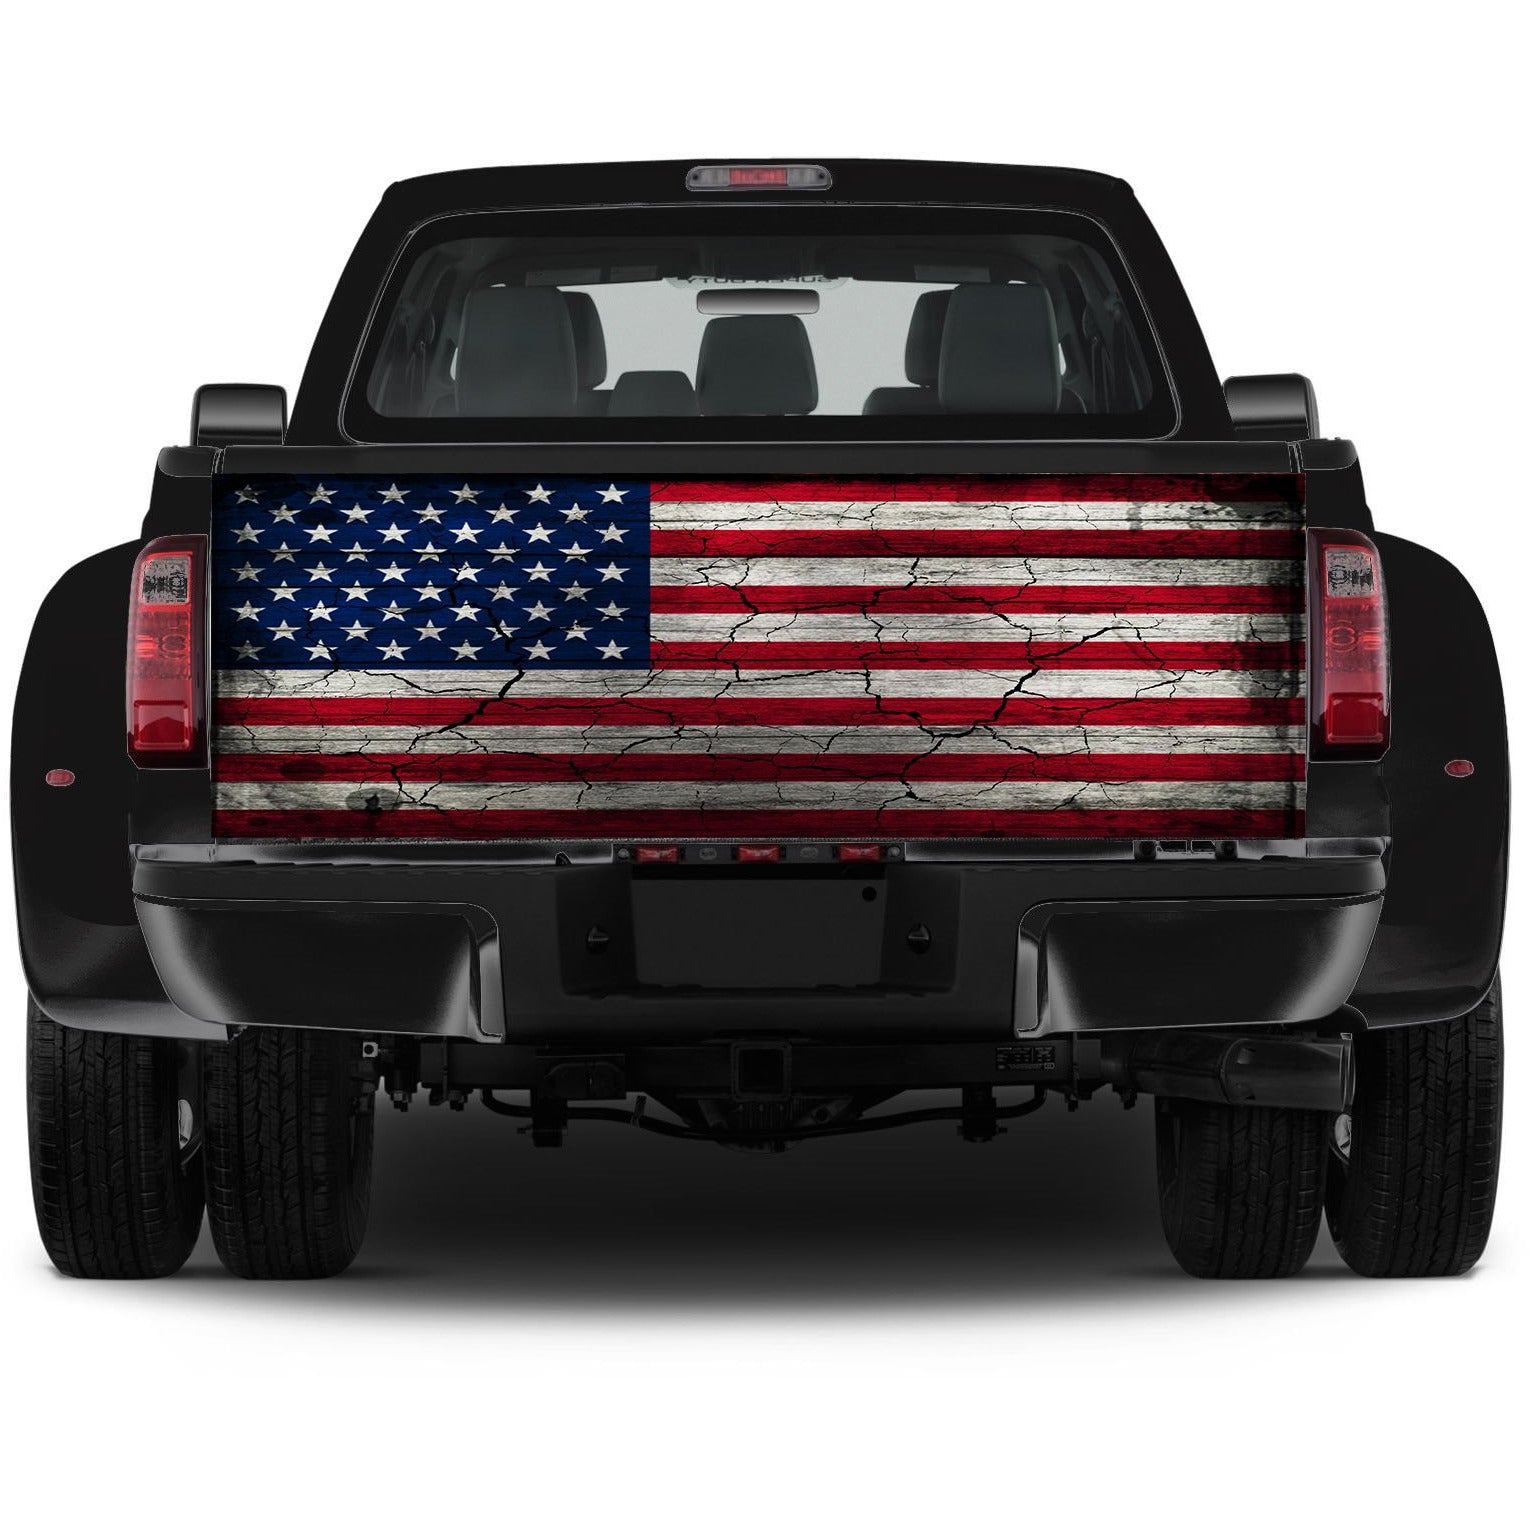 Dark Red 167X58CM Car Stickers USA American Flag Tailgate Wrap Vinyl Graphic Pickup Decal